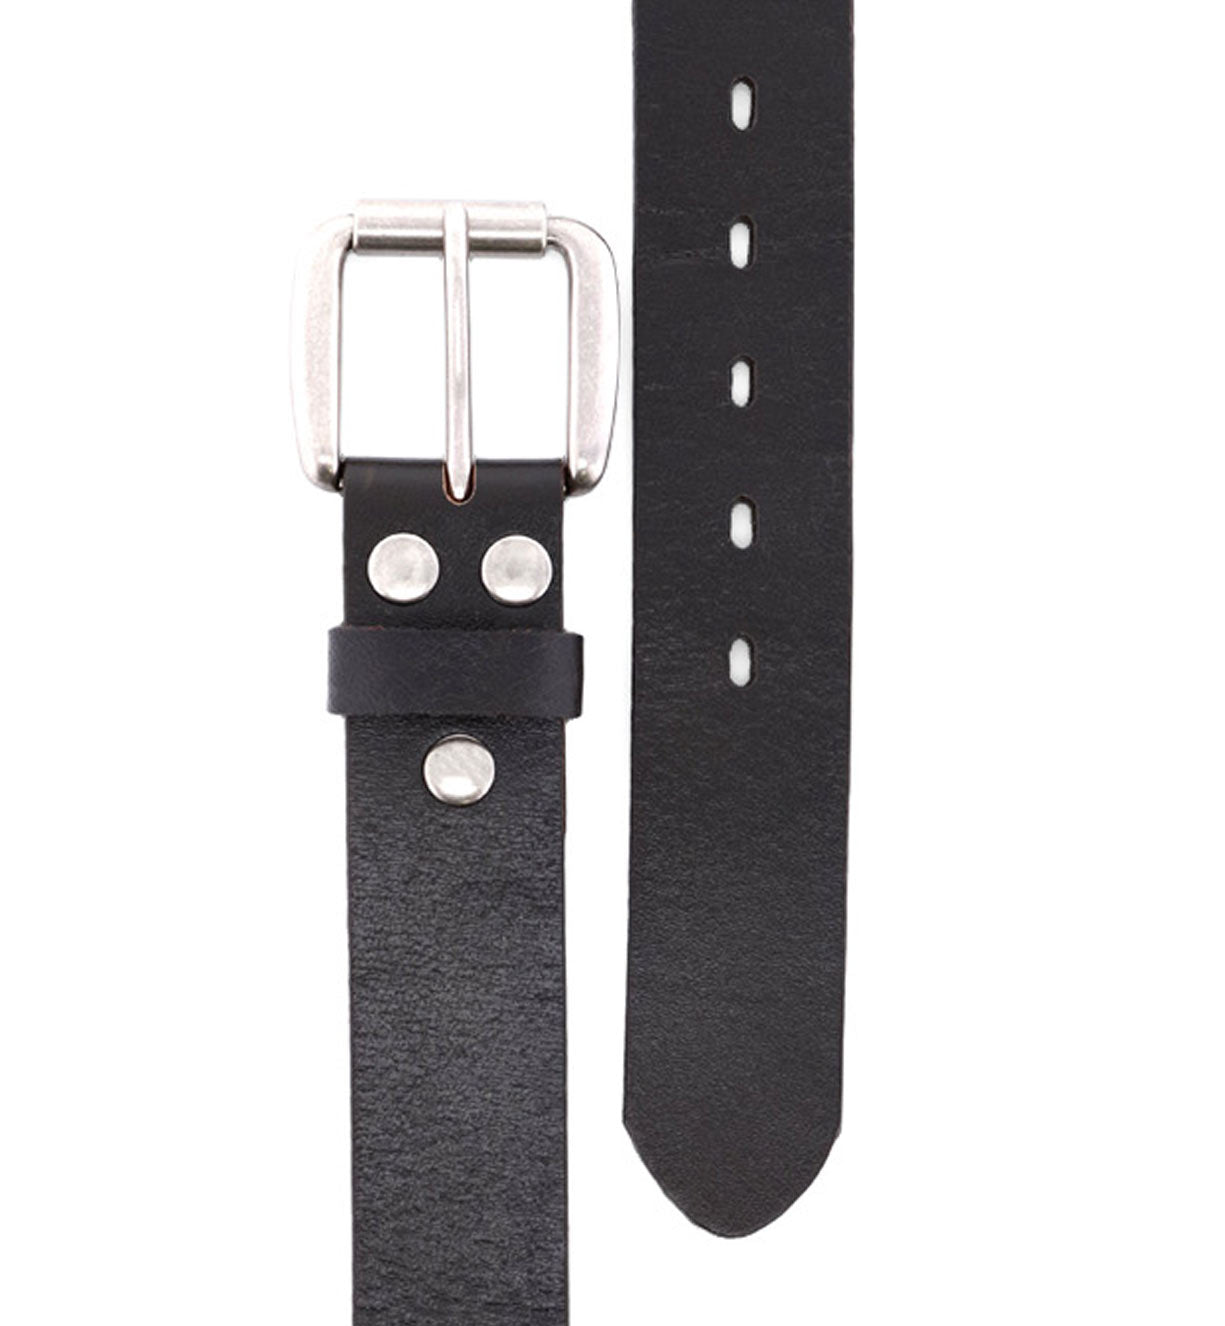 A Drifter belt by Bed Stu on a white background.